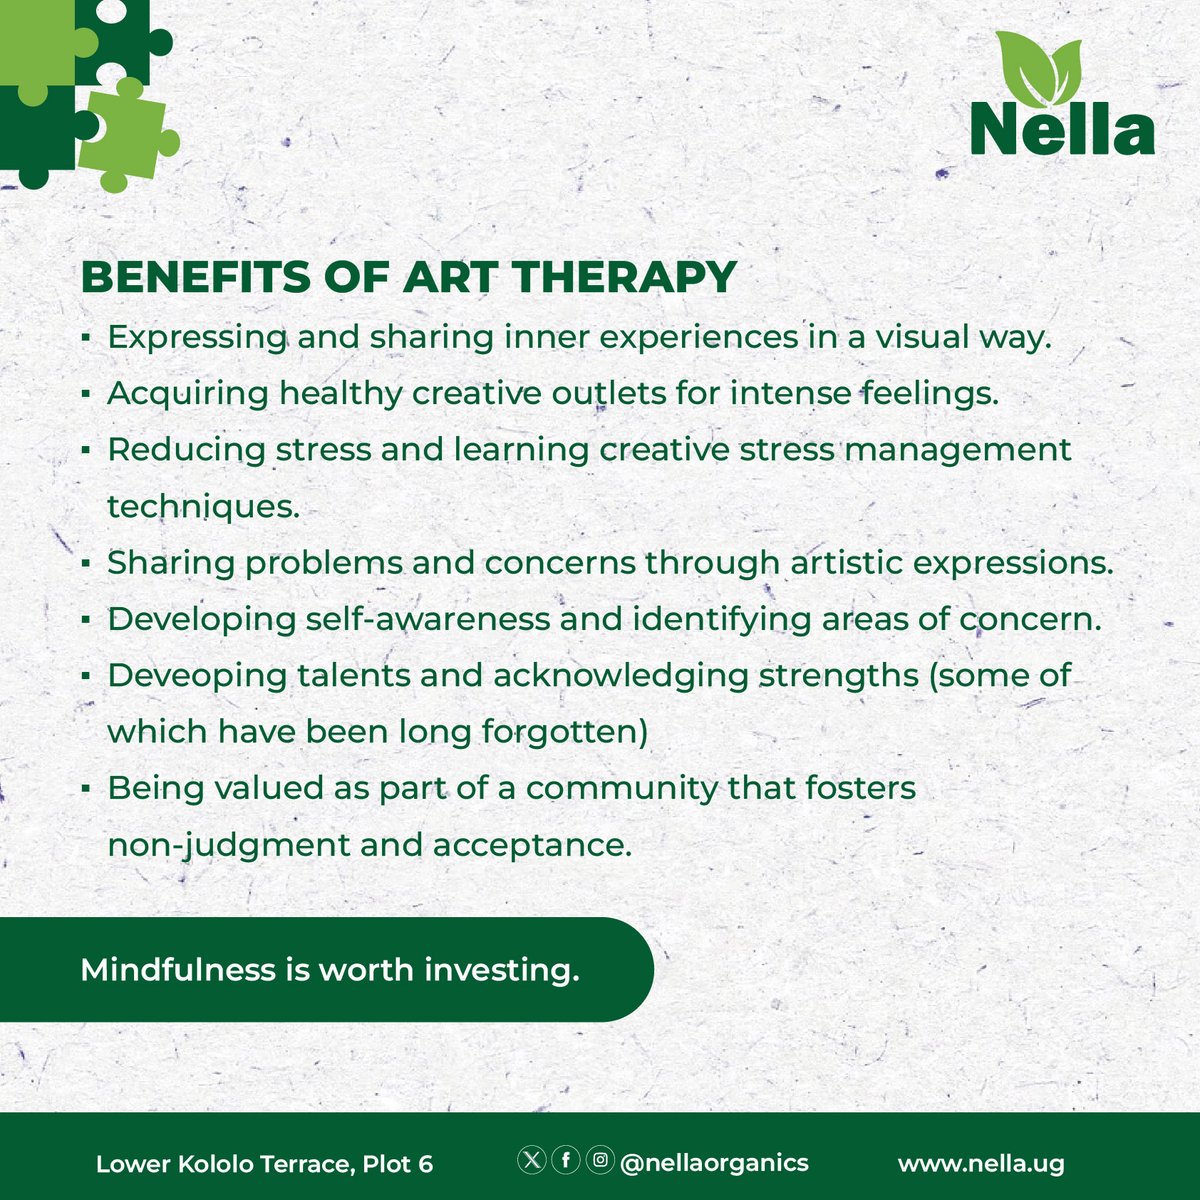 Art therapy is a form of therapy that utilizes creative expression through various art forms, such as drawing, painting, sculpting, and other artistic activities, to improve mental, emotional, and physical well-being! #art #wellness360 #mentalhealth